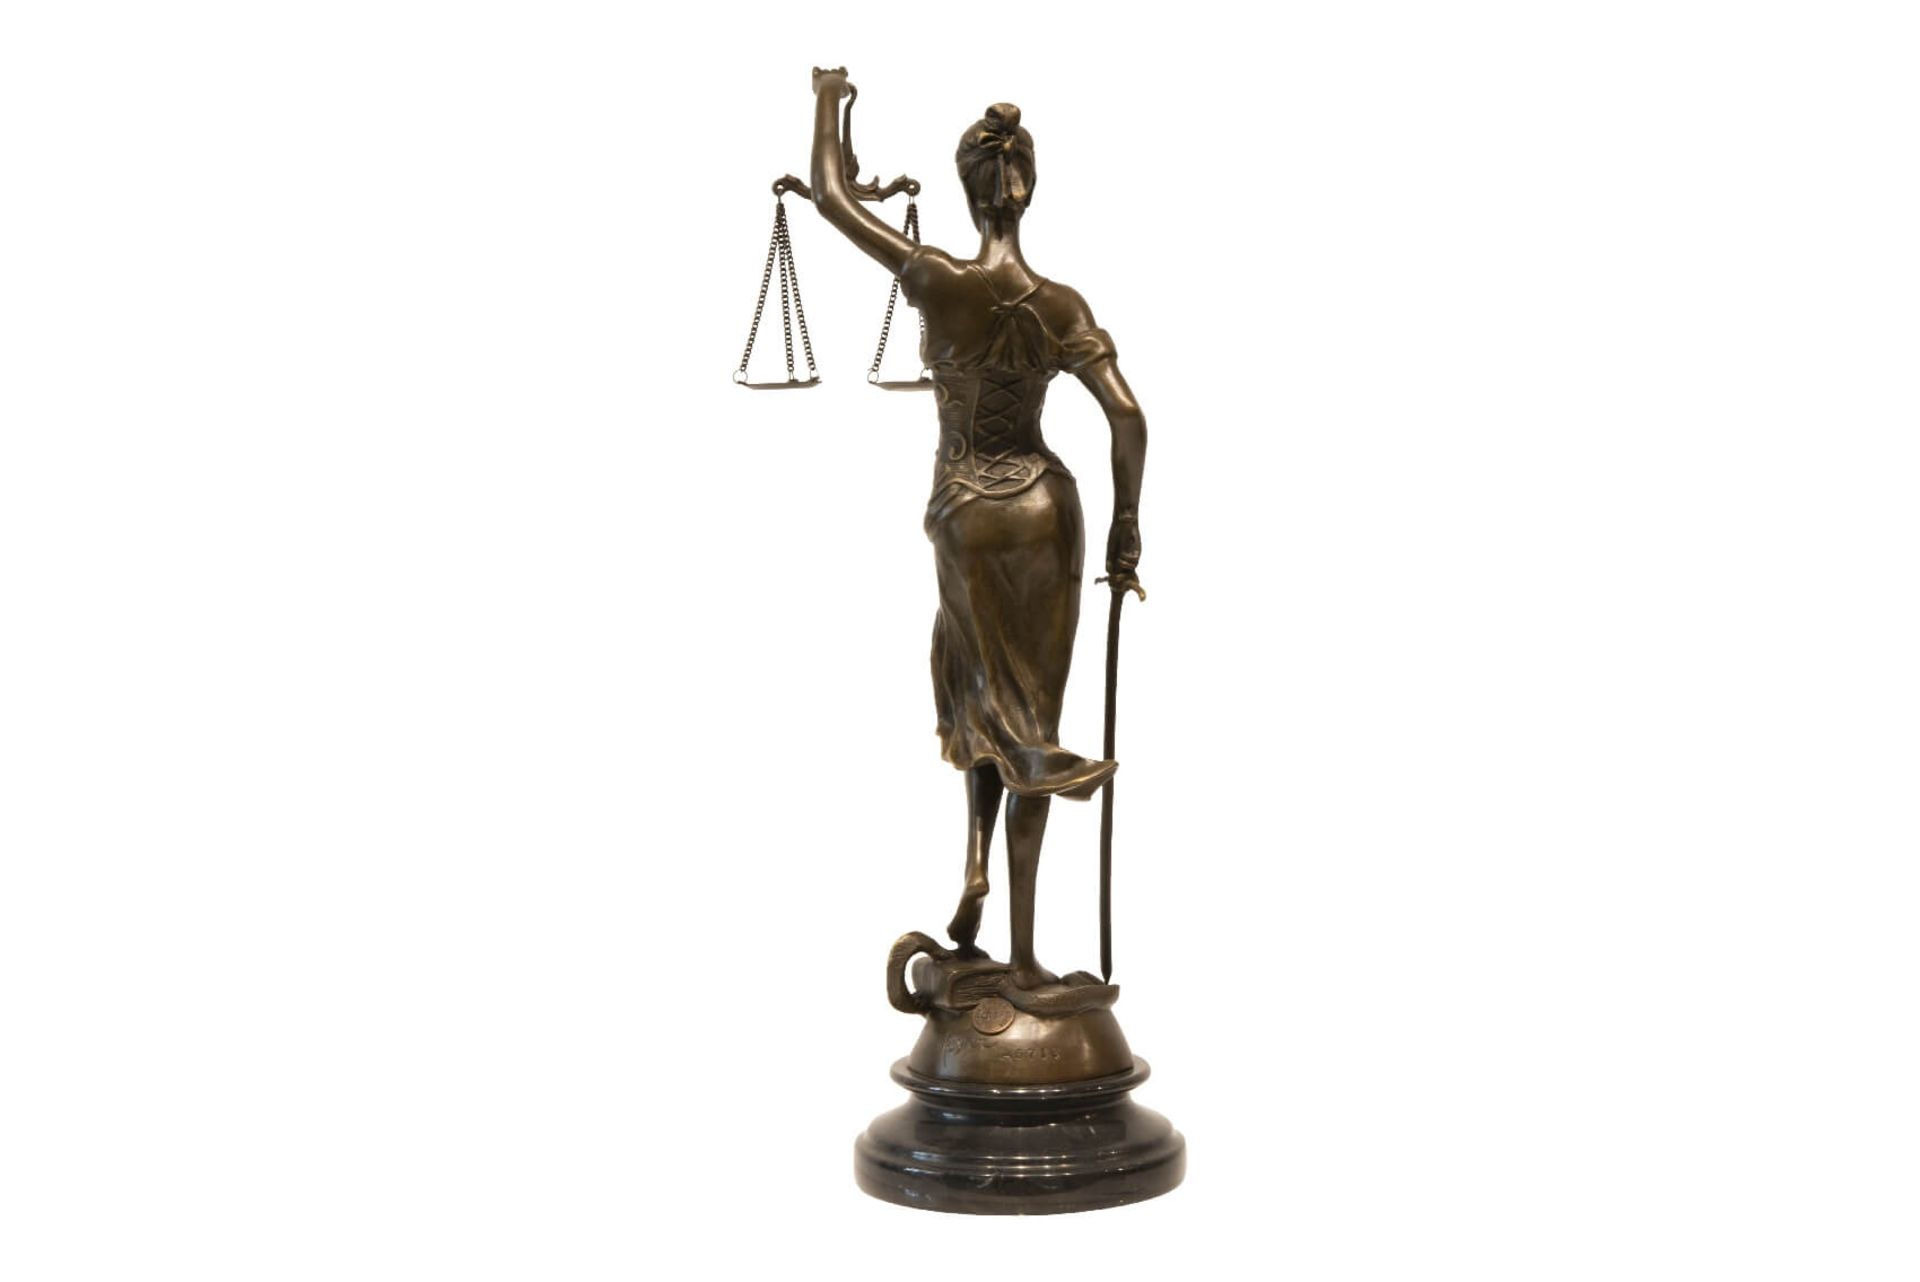 Alois Mayer 1855-1936, Reproduktion Justicia | Alois Mayer 1855-1936, Lady Justice Reproduction - Image 3 of 5